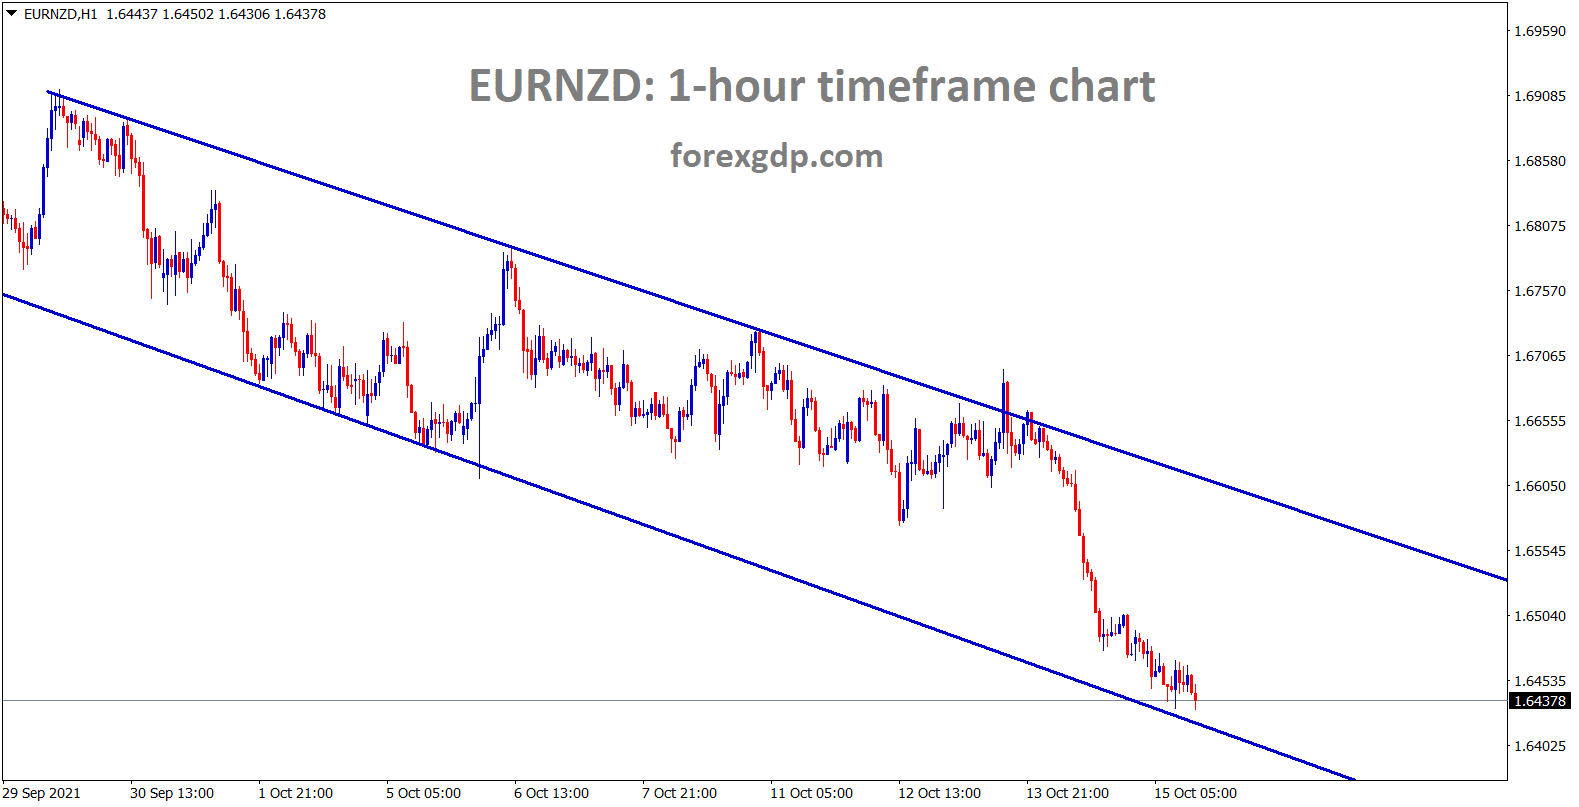 EURNZD is moving in a descending channel range